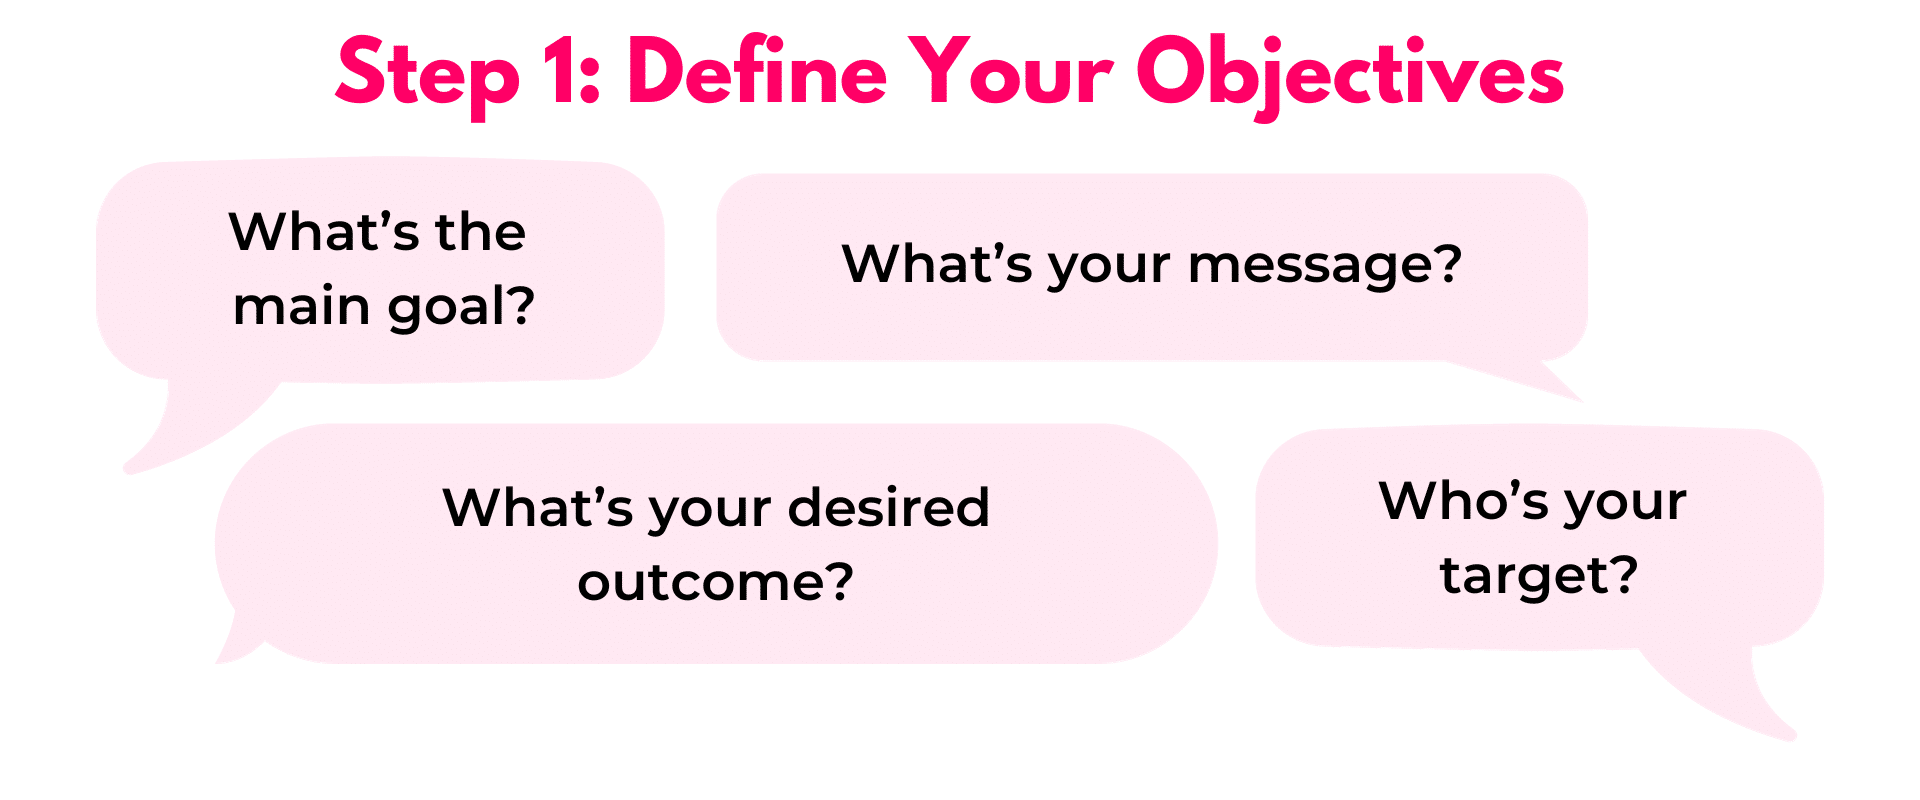 Step 1 define your objectives.